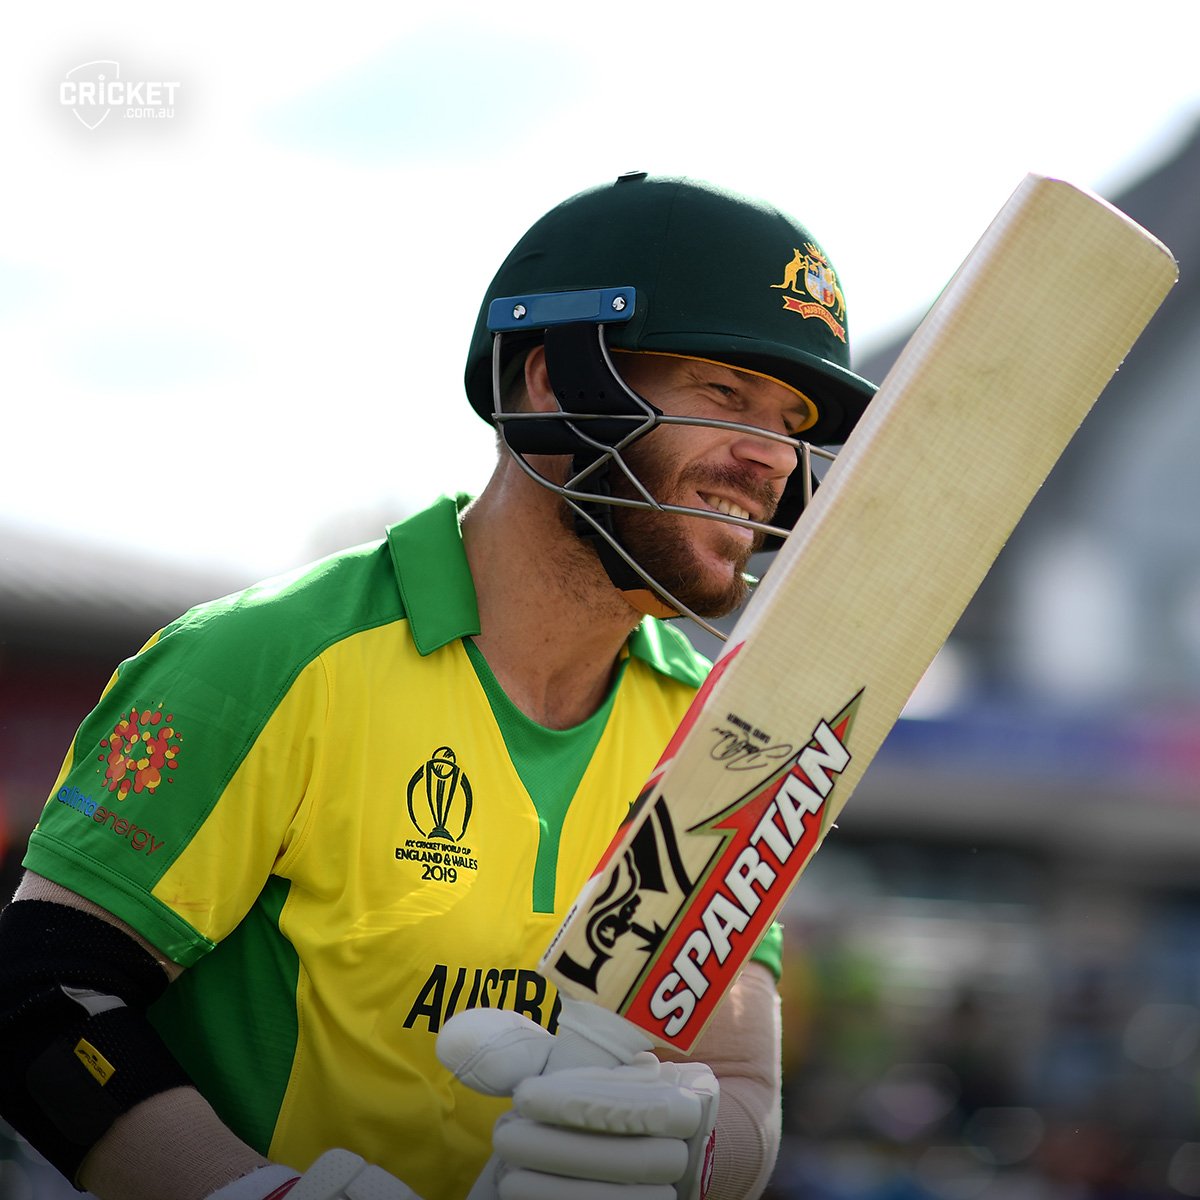 Cricket-Warner heroics for Australia are in vain as defeat sets up England semi-final